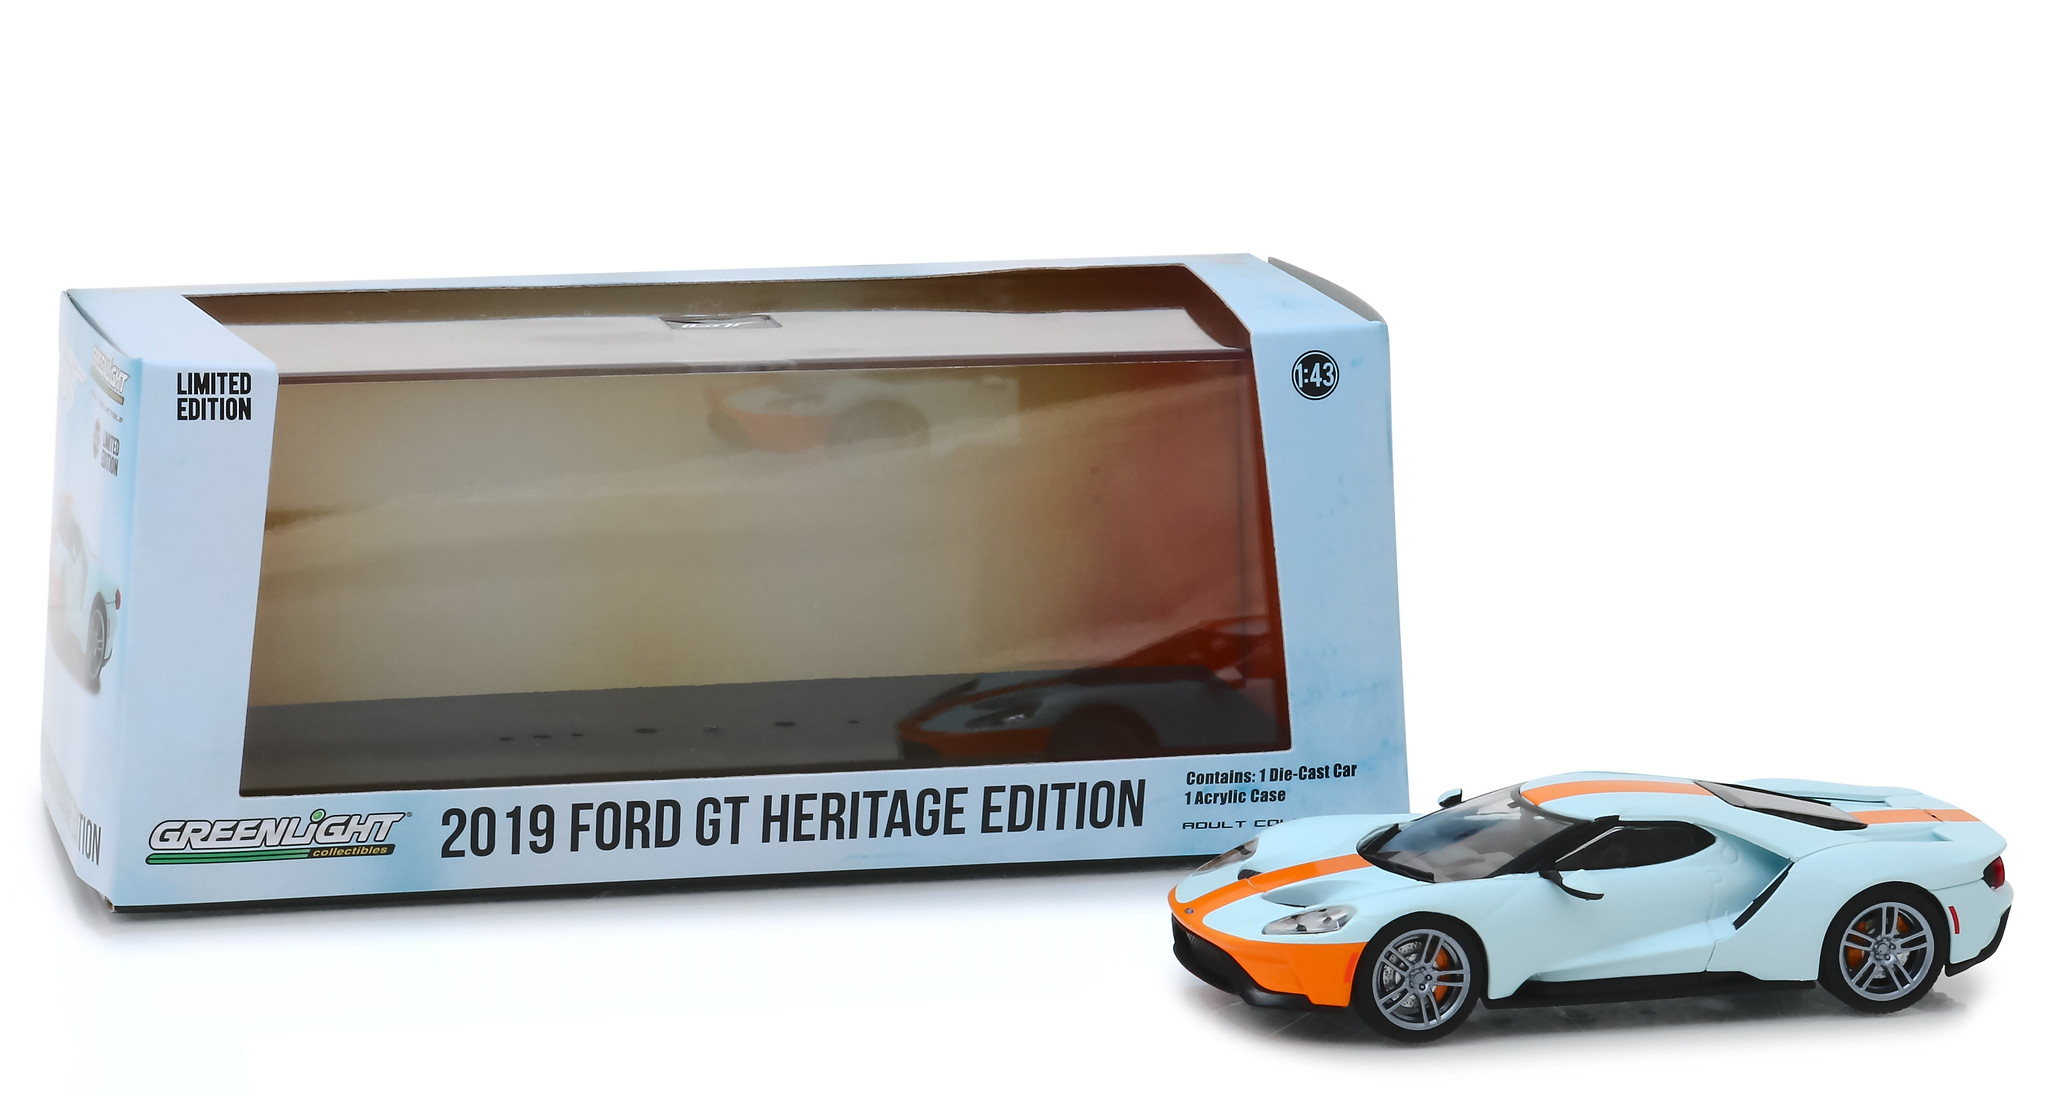 GreenLight 2019 Ford GT Heritage Edition "Gulf Oil" Color Scheme 1/43 Diecast Model Car by Greenlight